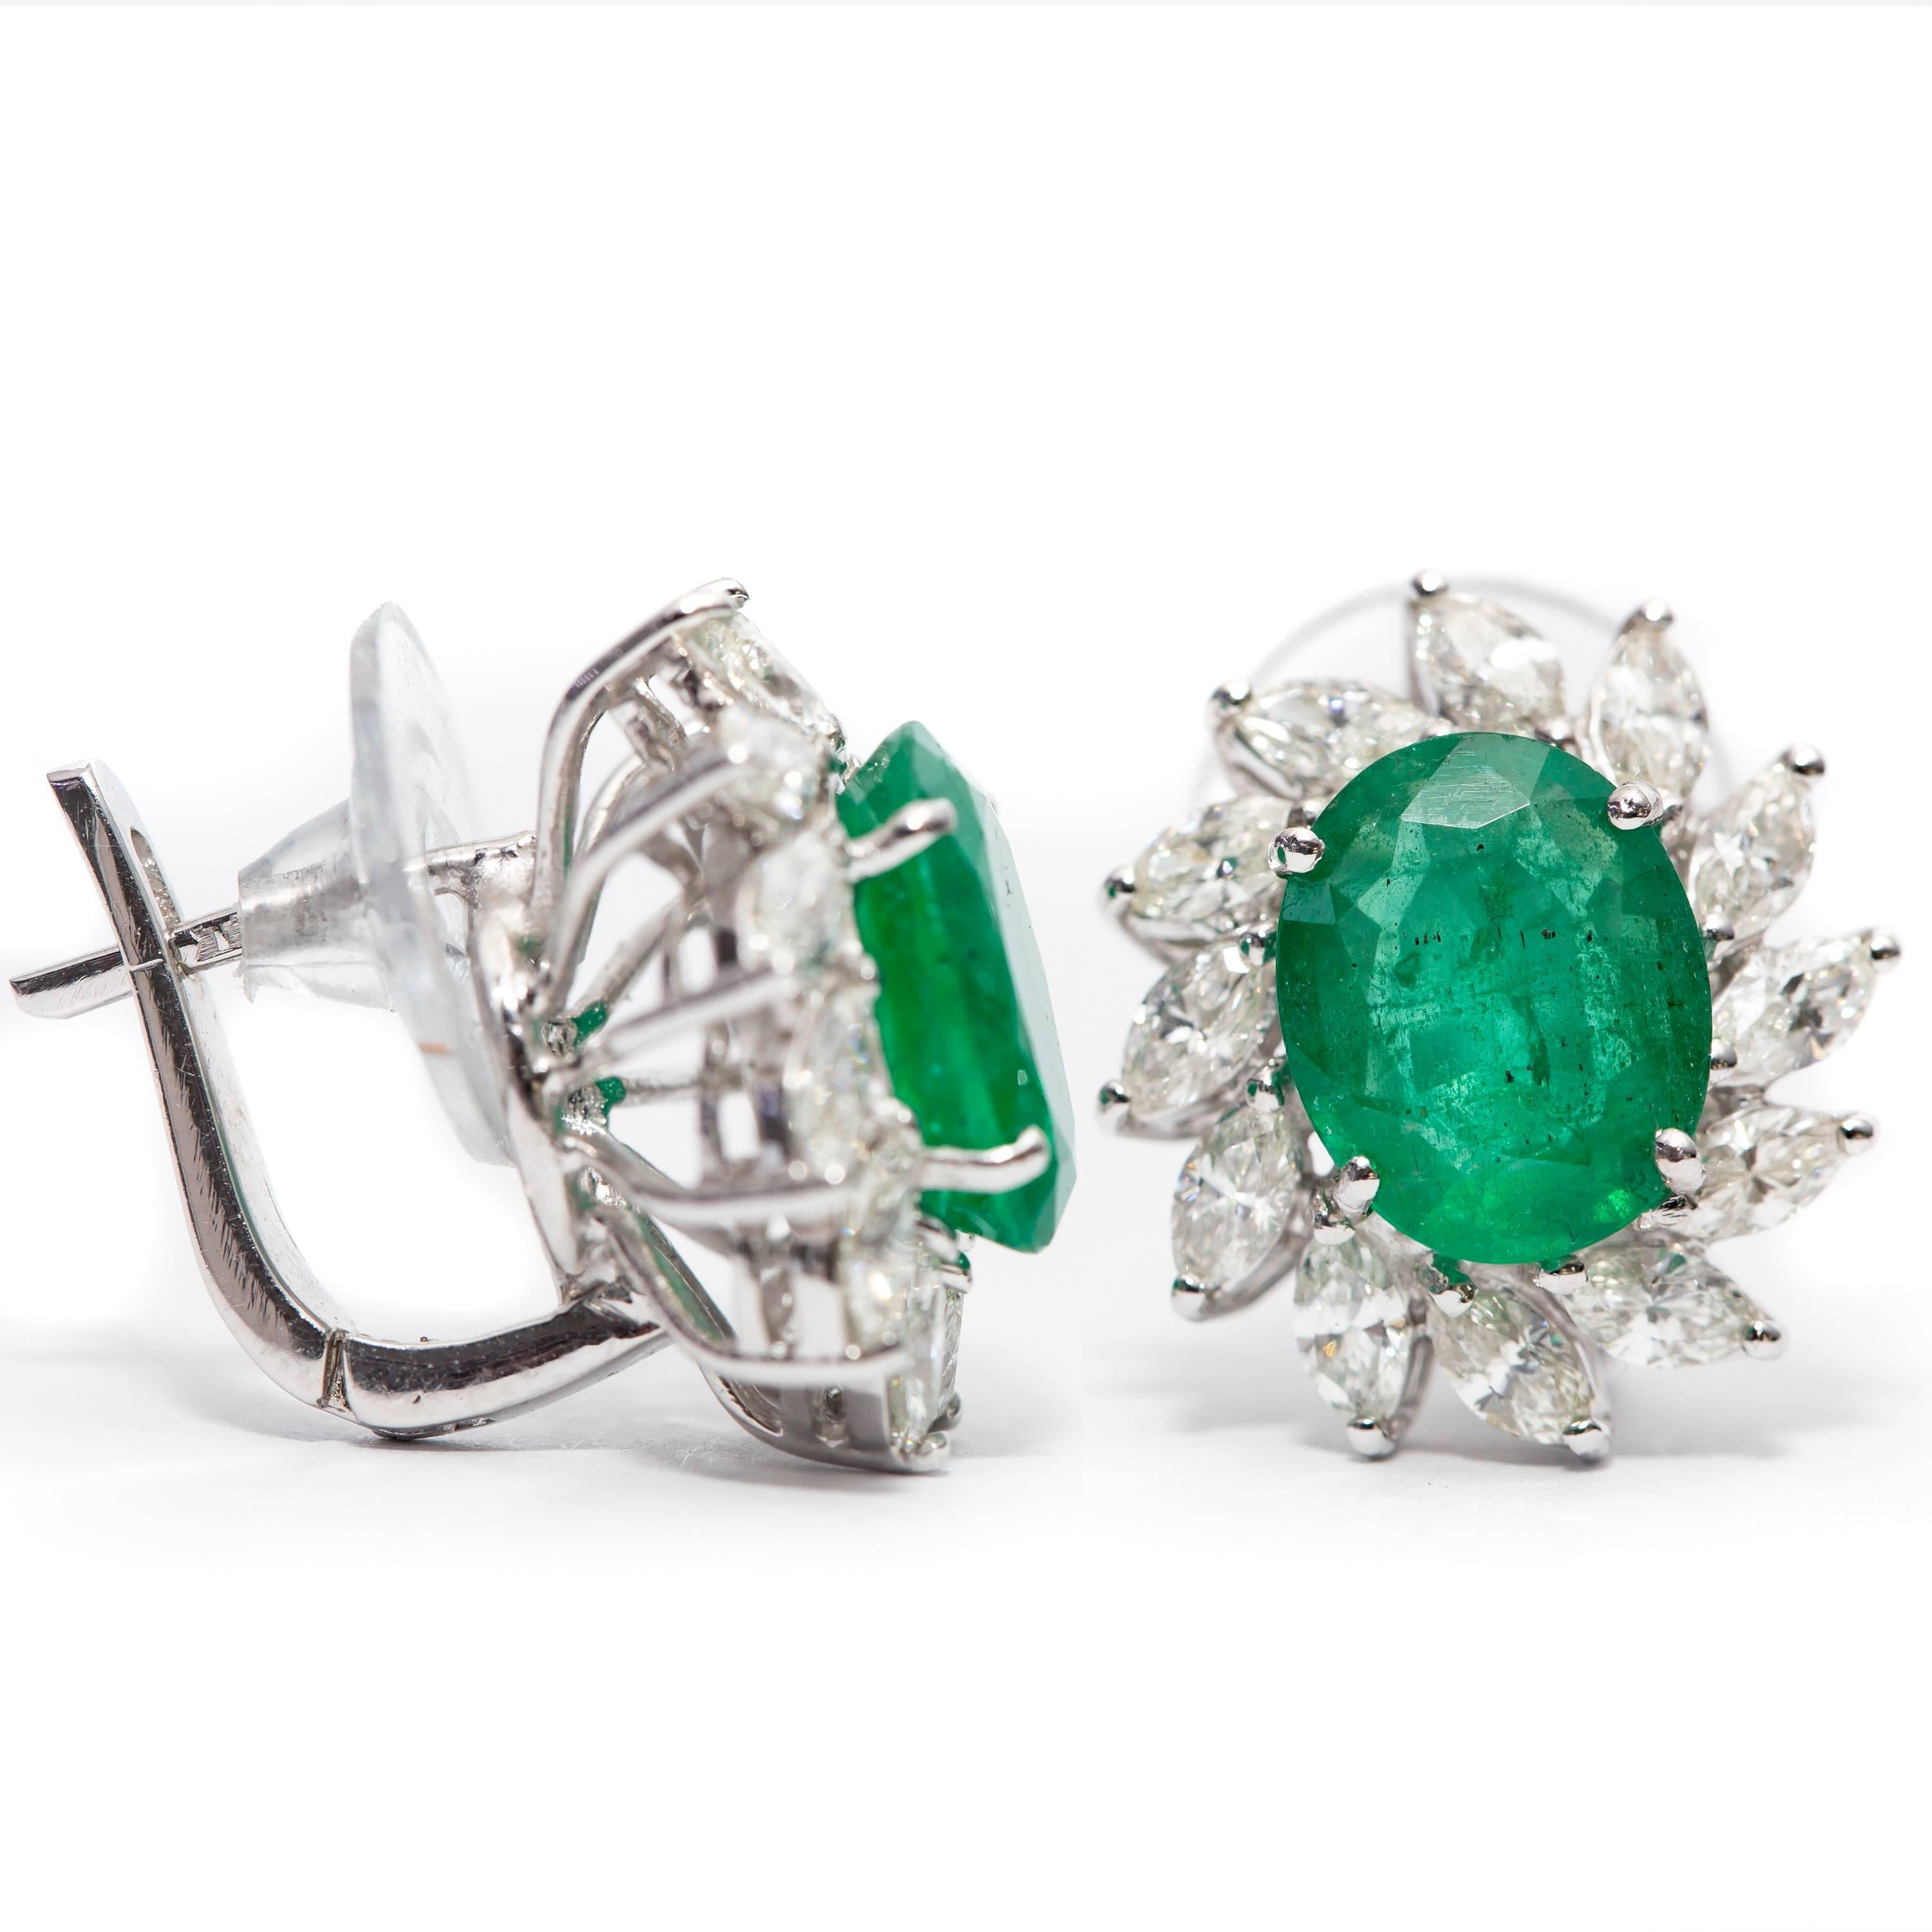 Marquise Cut Bespoke 3.50 Carat Green Emerald 1.50 Carat Marquise 18 Kt Gold Diamond Earrings For Sale